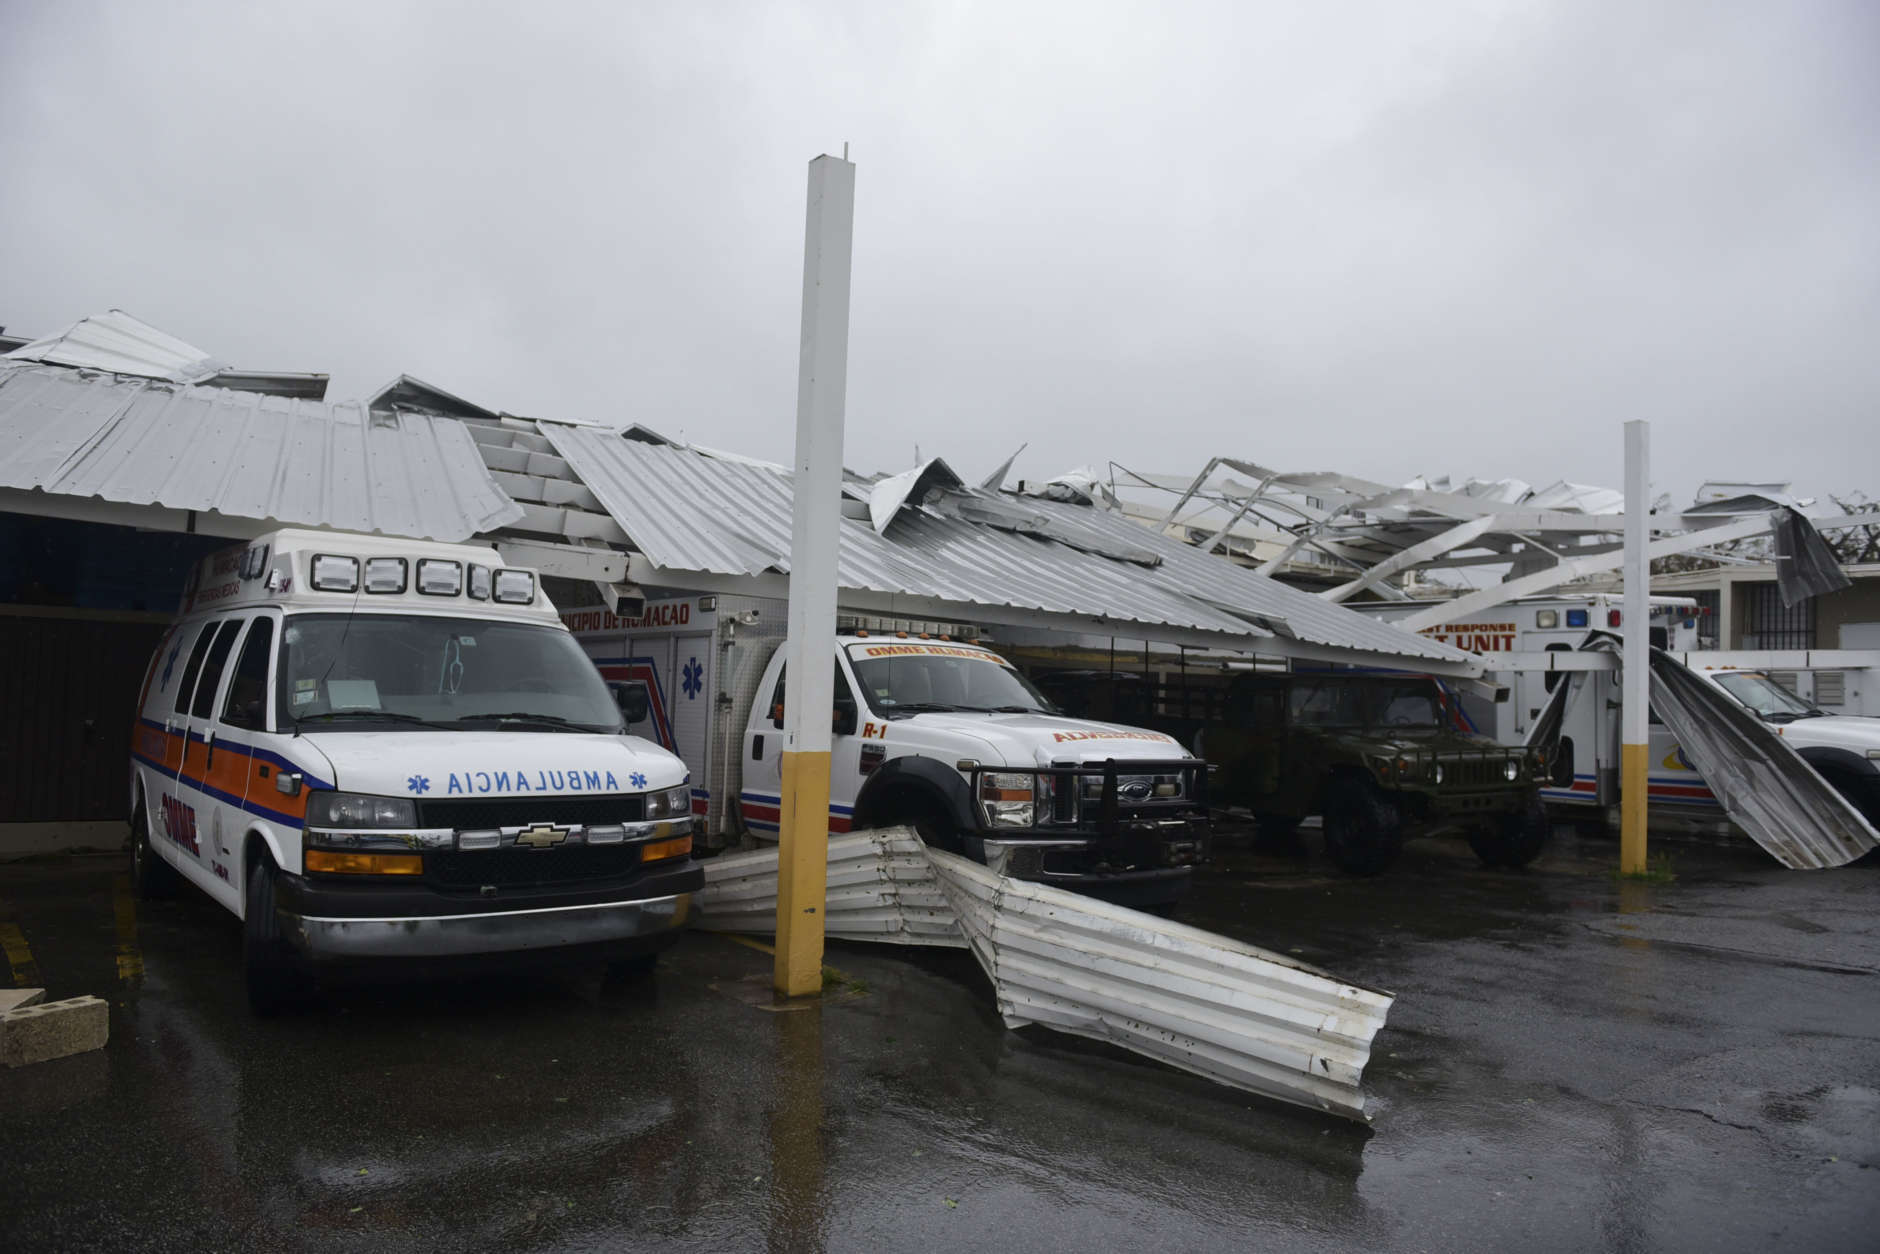 Rescue vehicles from the Emergency Management Agency stand trapped under an awning during the impact of Hurricane Maria, which hit the eastern region of the island, in Humacao, Puerto Rico, Wednesday, Sept. 20, 2017. The U.S. National Hurricane Center says Maria has lost its major hurricane status, after raking Puerto Rico. But forecasters say some strengthening is in the forecast and Maria could again become a major hurricane by Thursday. (AP Photo/Carlos Giusti)